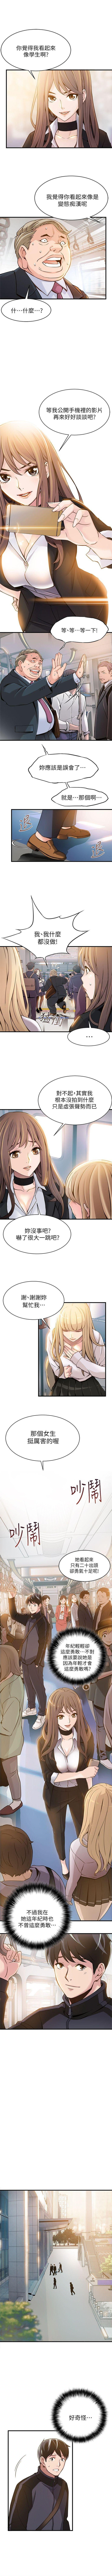 Lesbo 弱點 1-104 官方中文（連載中） Bizarre - Page 10